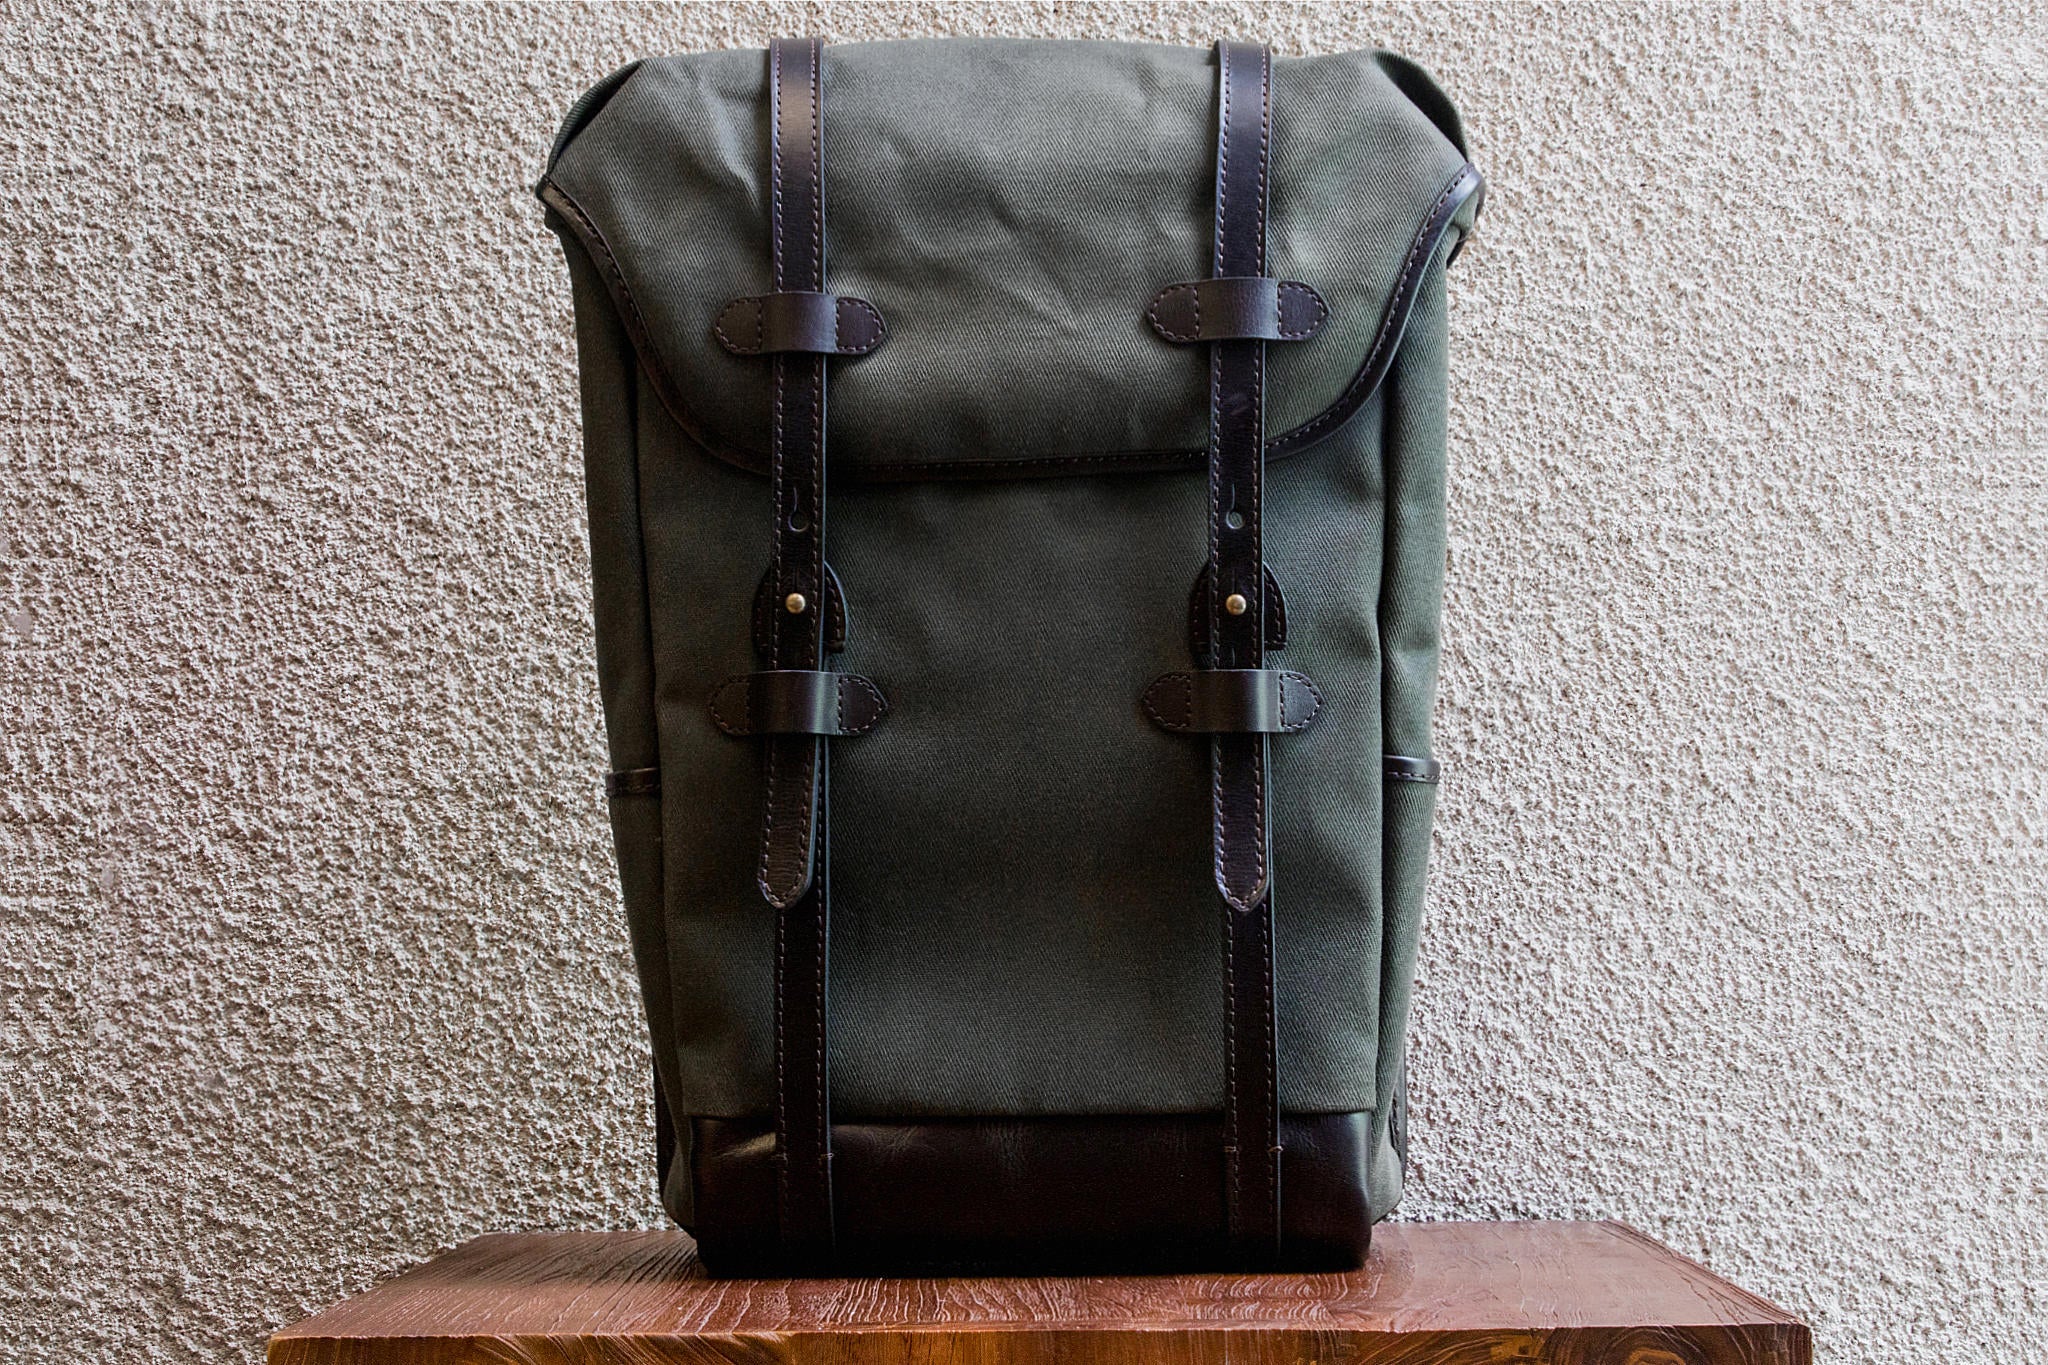 Daypack/Olive - Waxed Twill